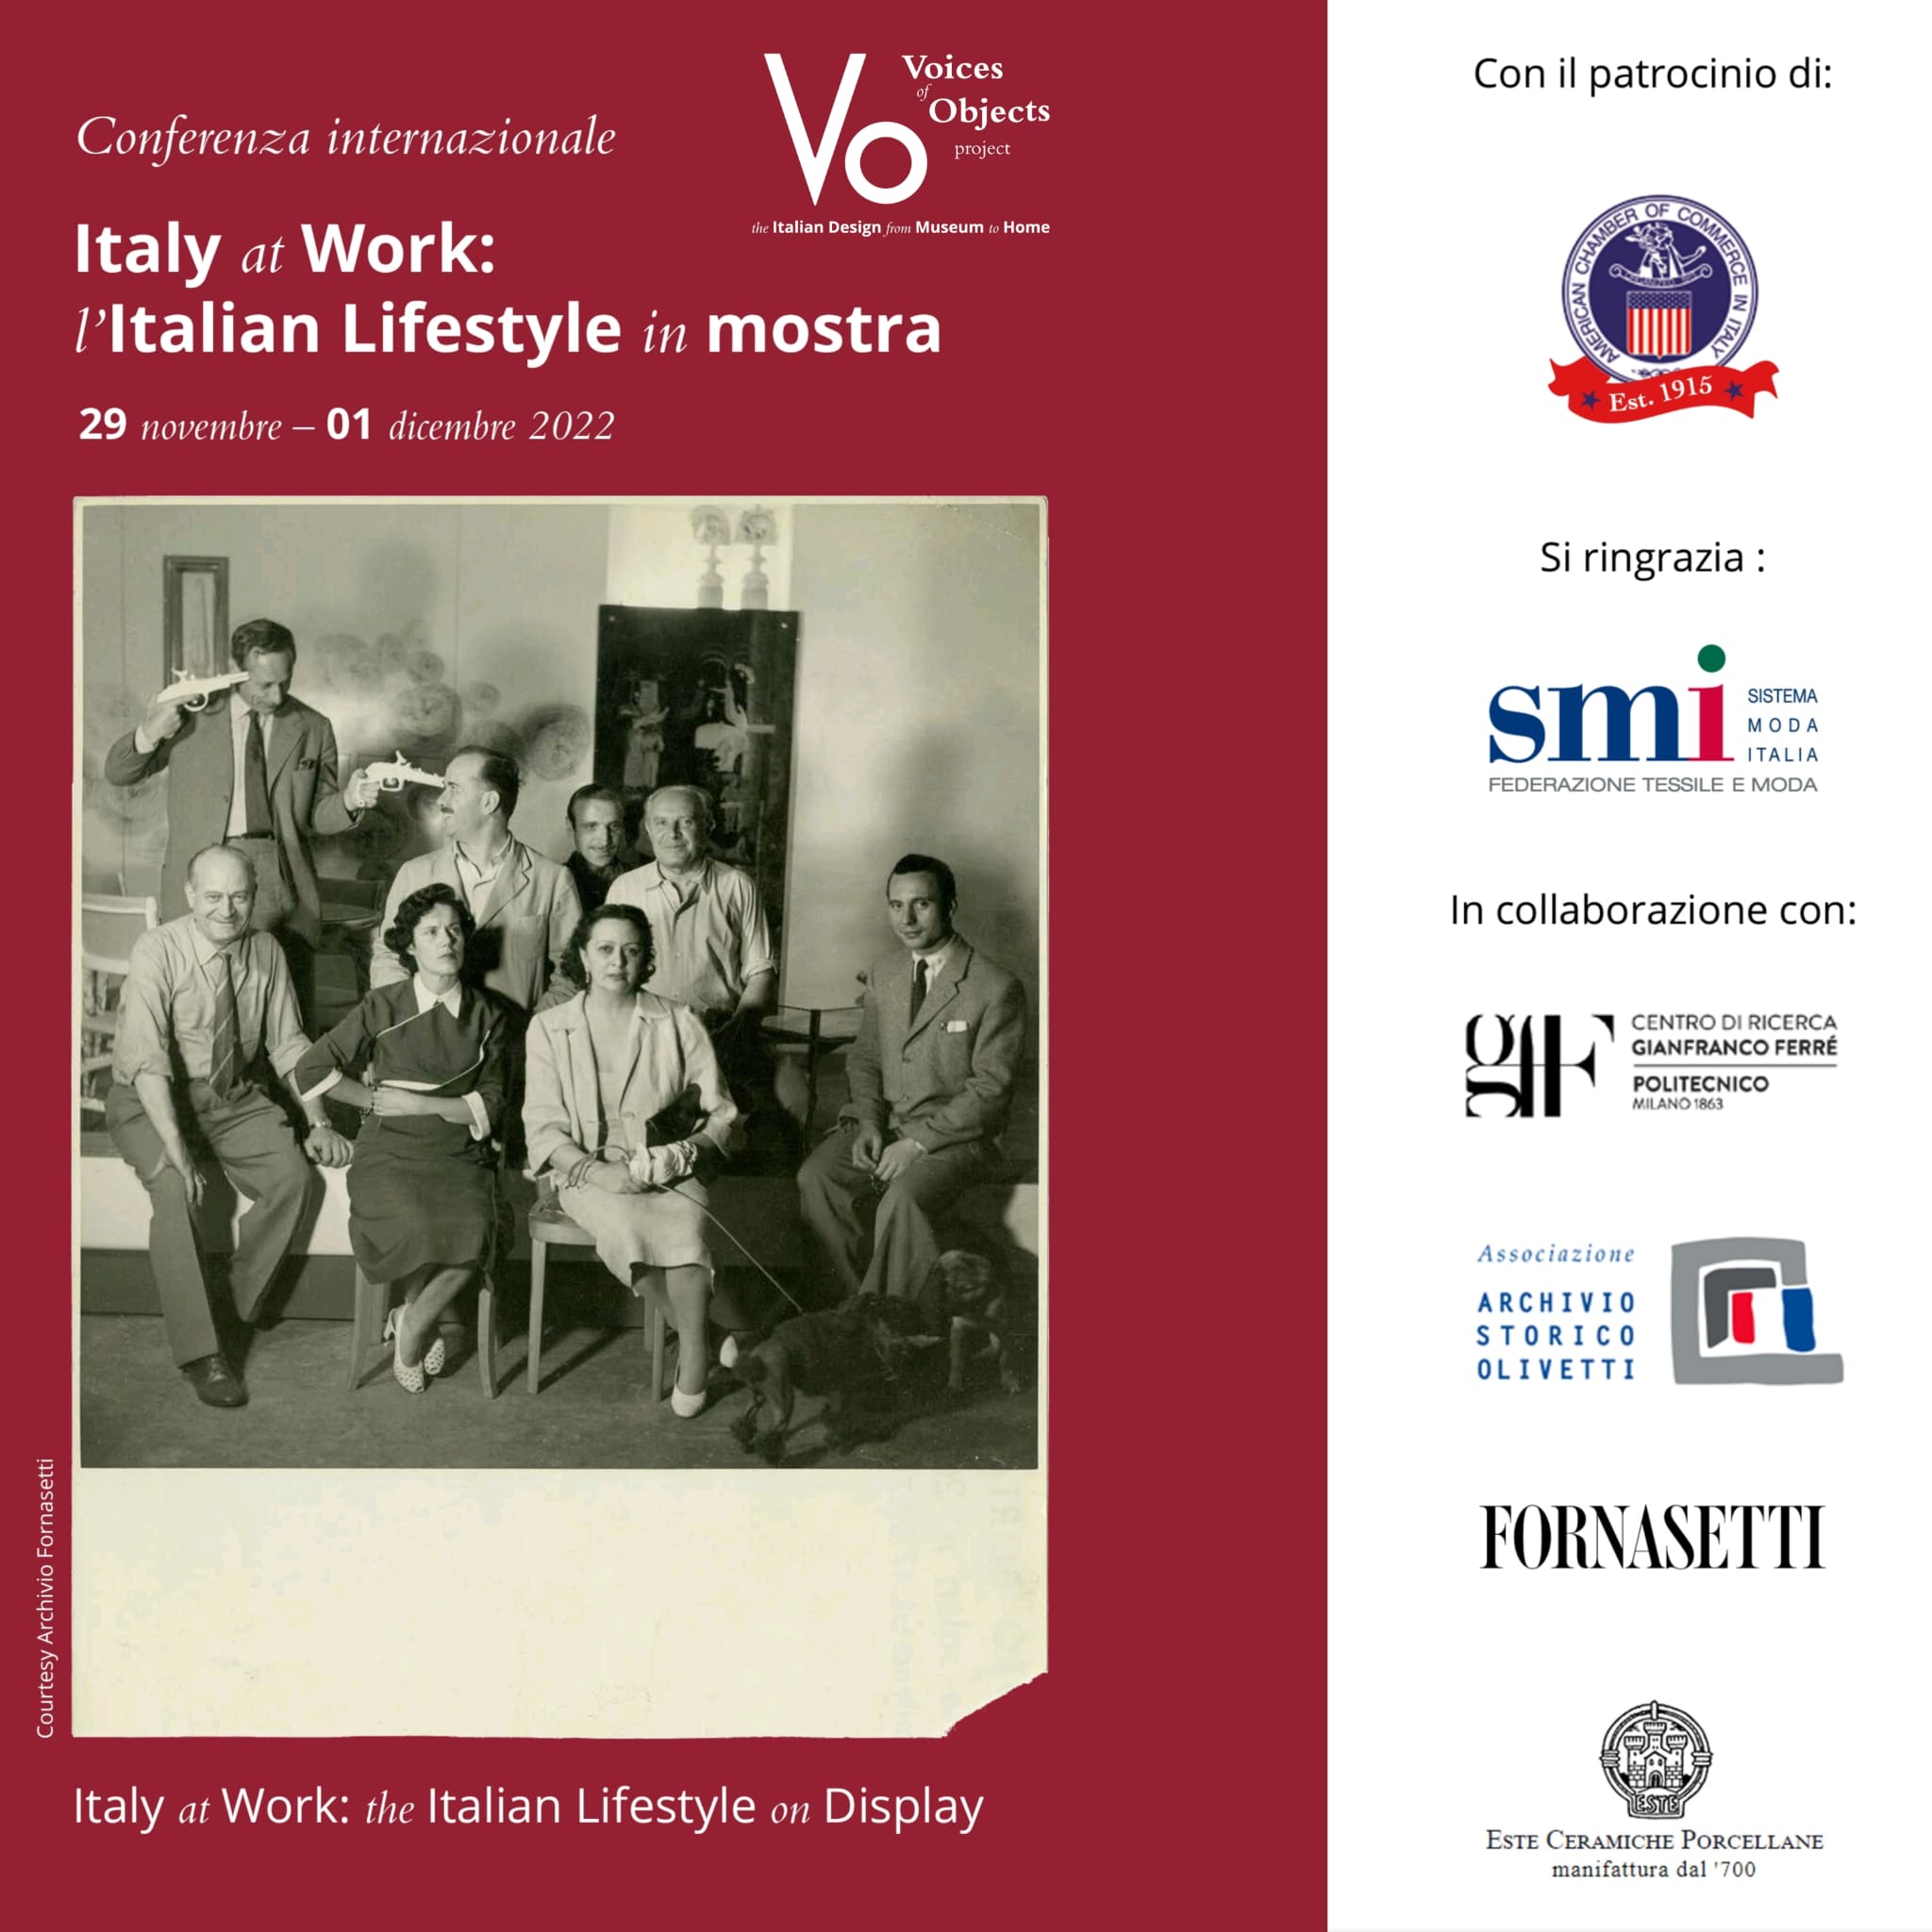 Italy at Work: The Italian Lifestyle on Display